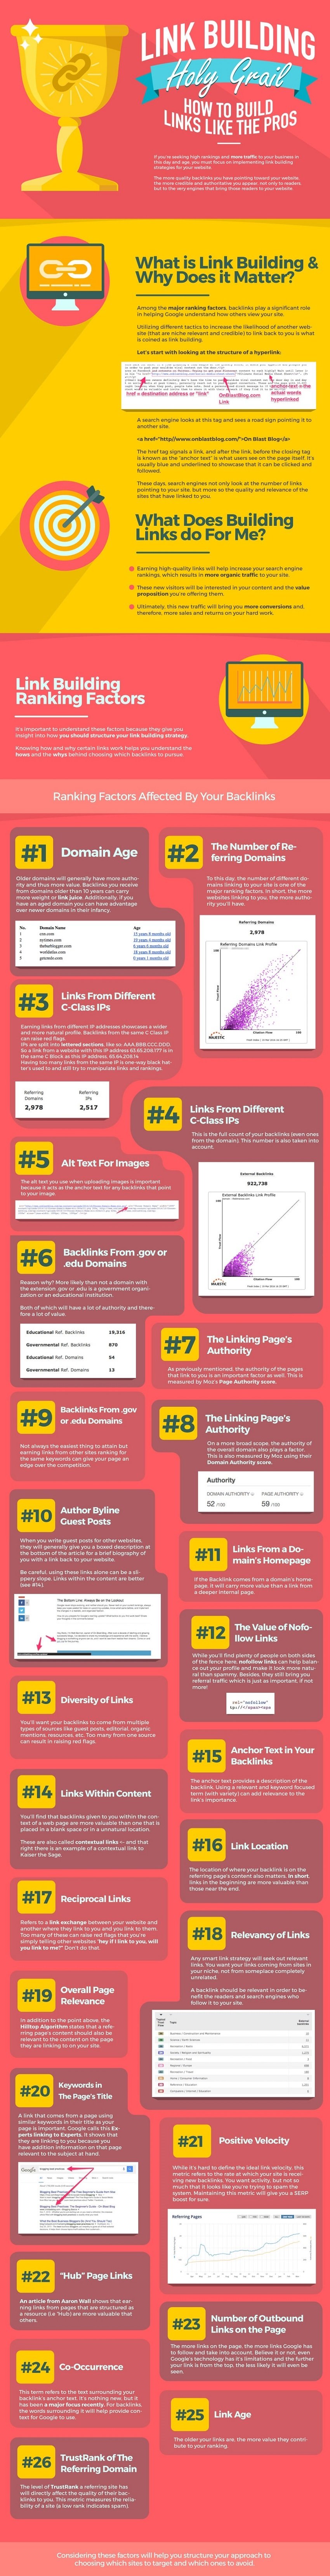 building links - Big infrographic